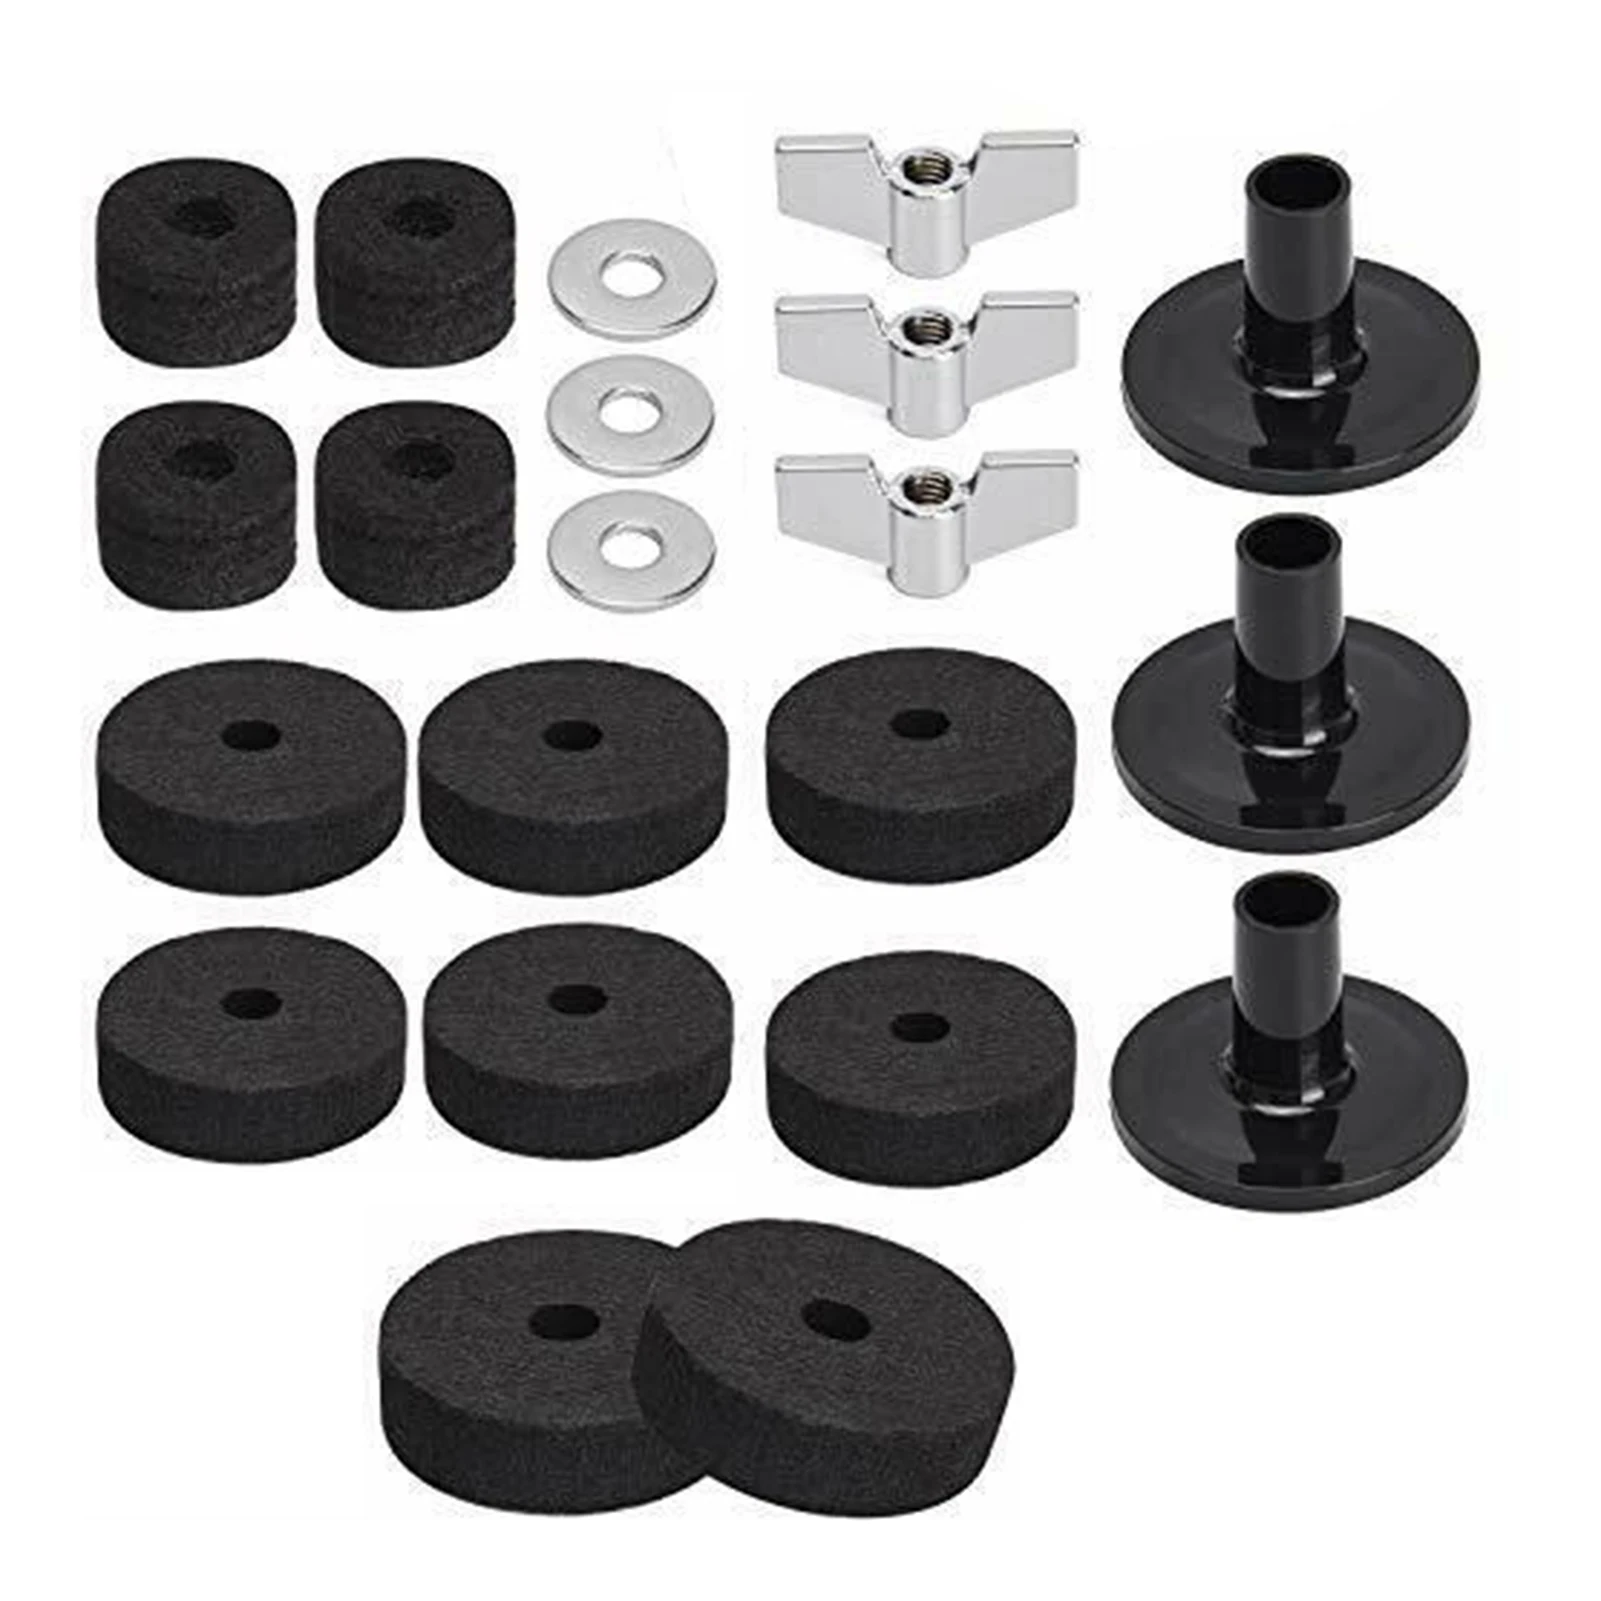 WingPower 12 Pieces Cymbal Replacement Accessories Cymbal Stand Sleeves Cymbal Felts with Cymbal Washer and Base Wing Nuts Replacement 